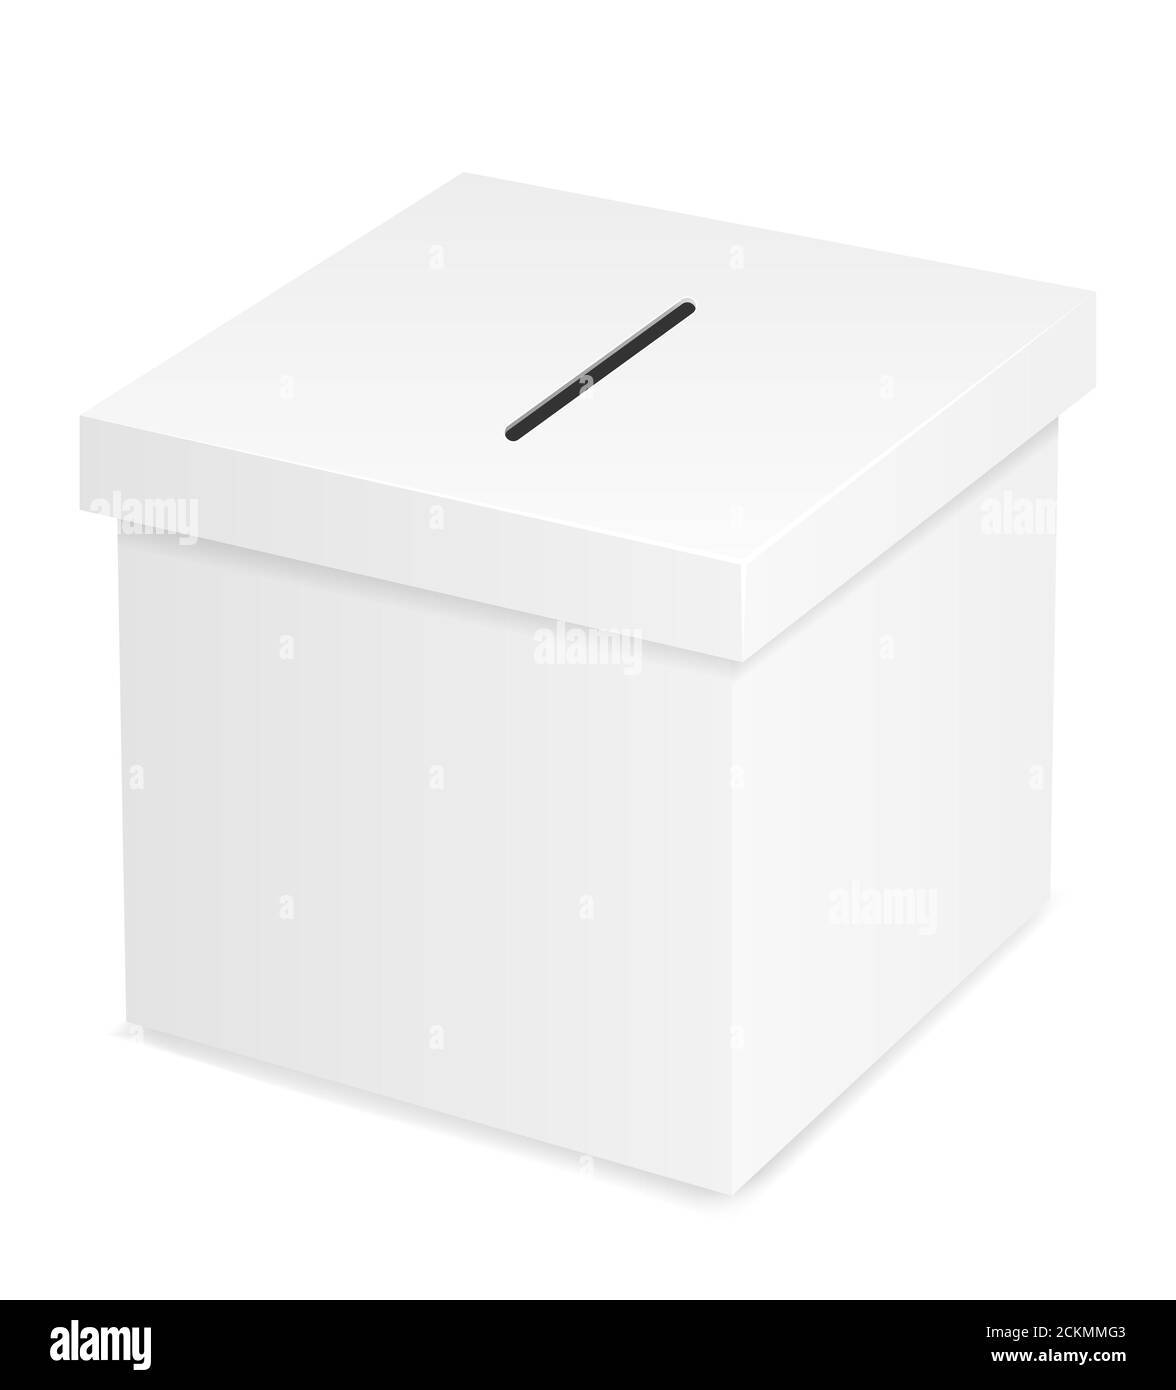 ballot box for election voting vector illustration isolated on white background Stock Photo